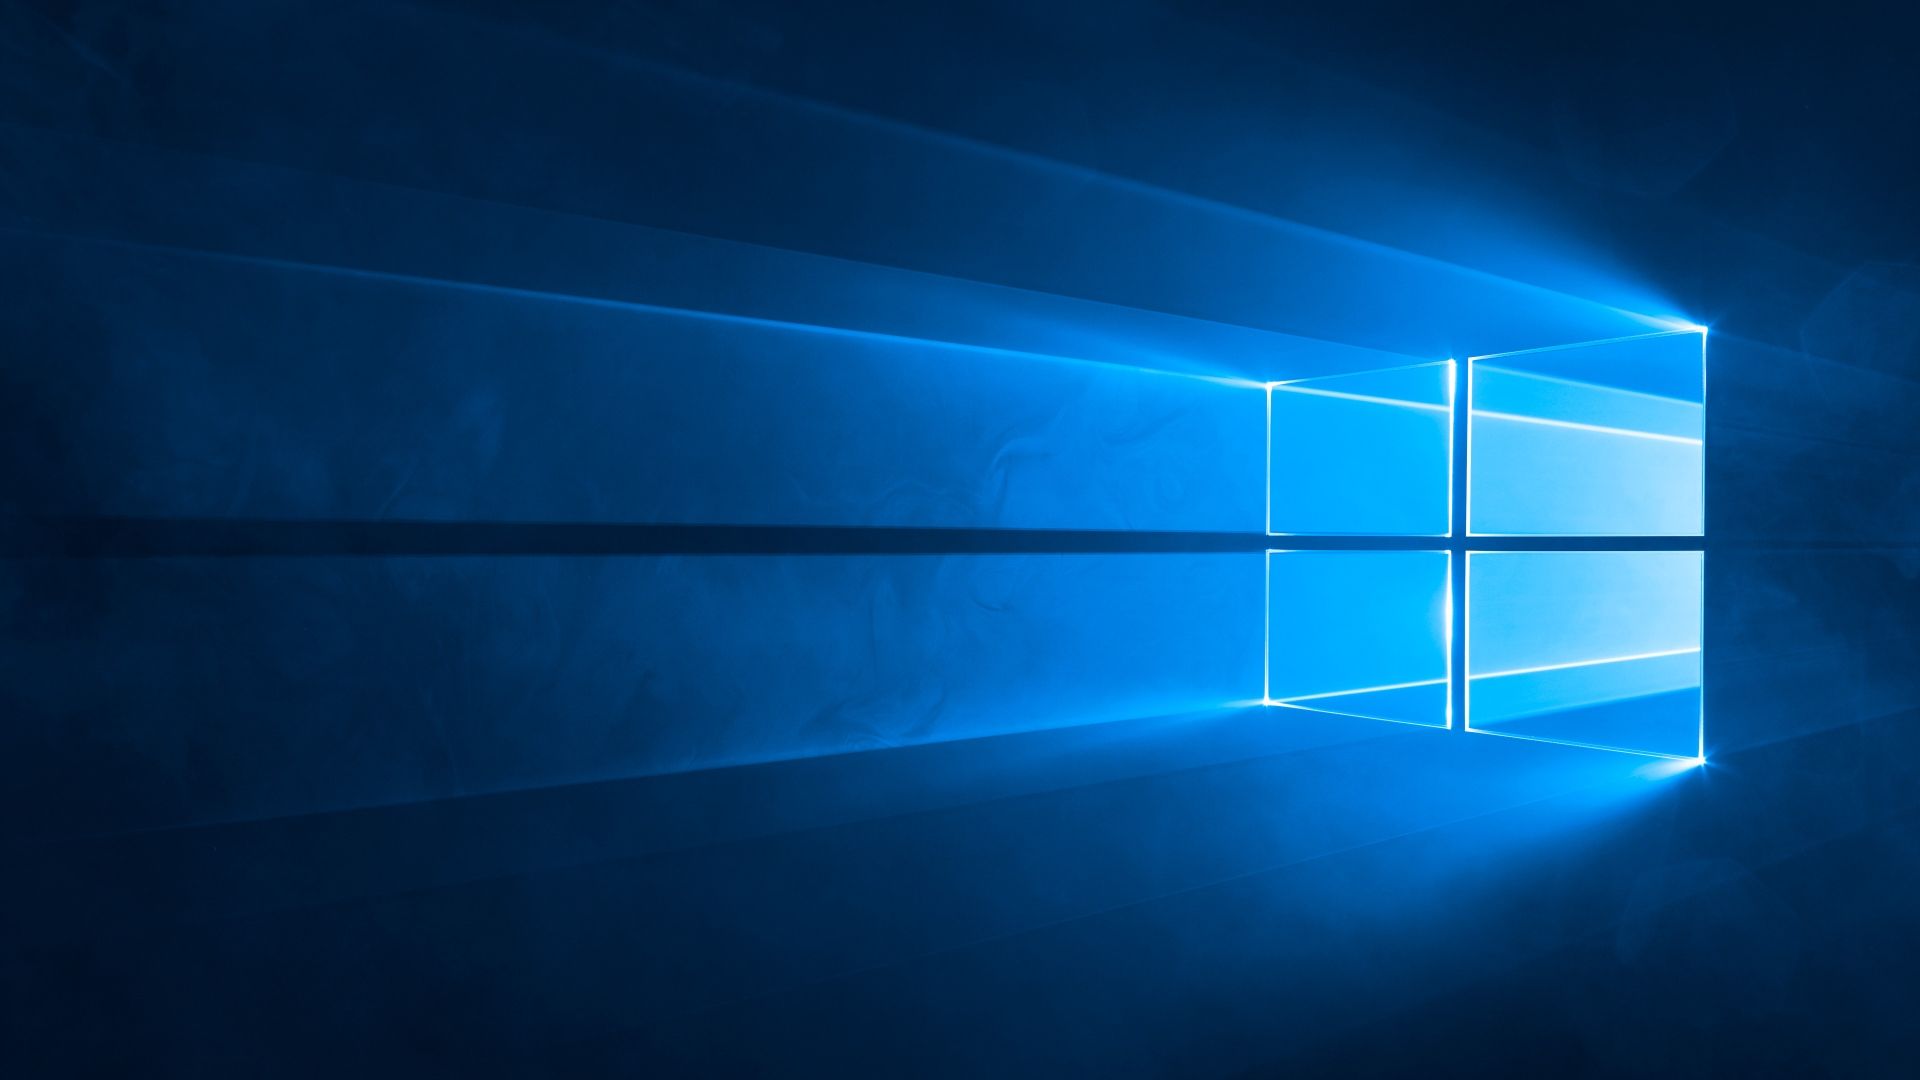 24 Stunning Windows 10 Wallpapers HD For Your Desktop